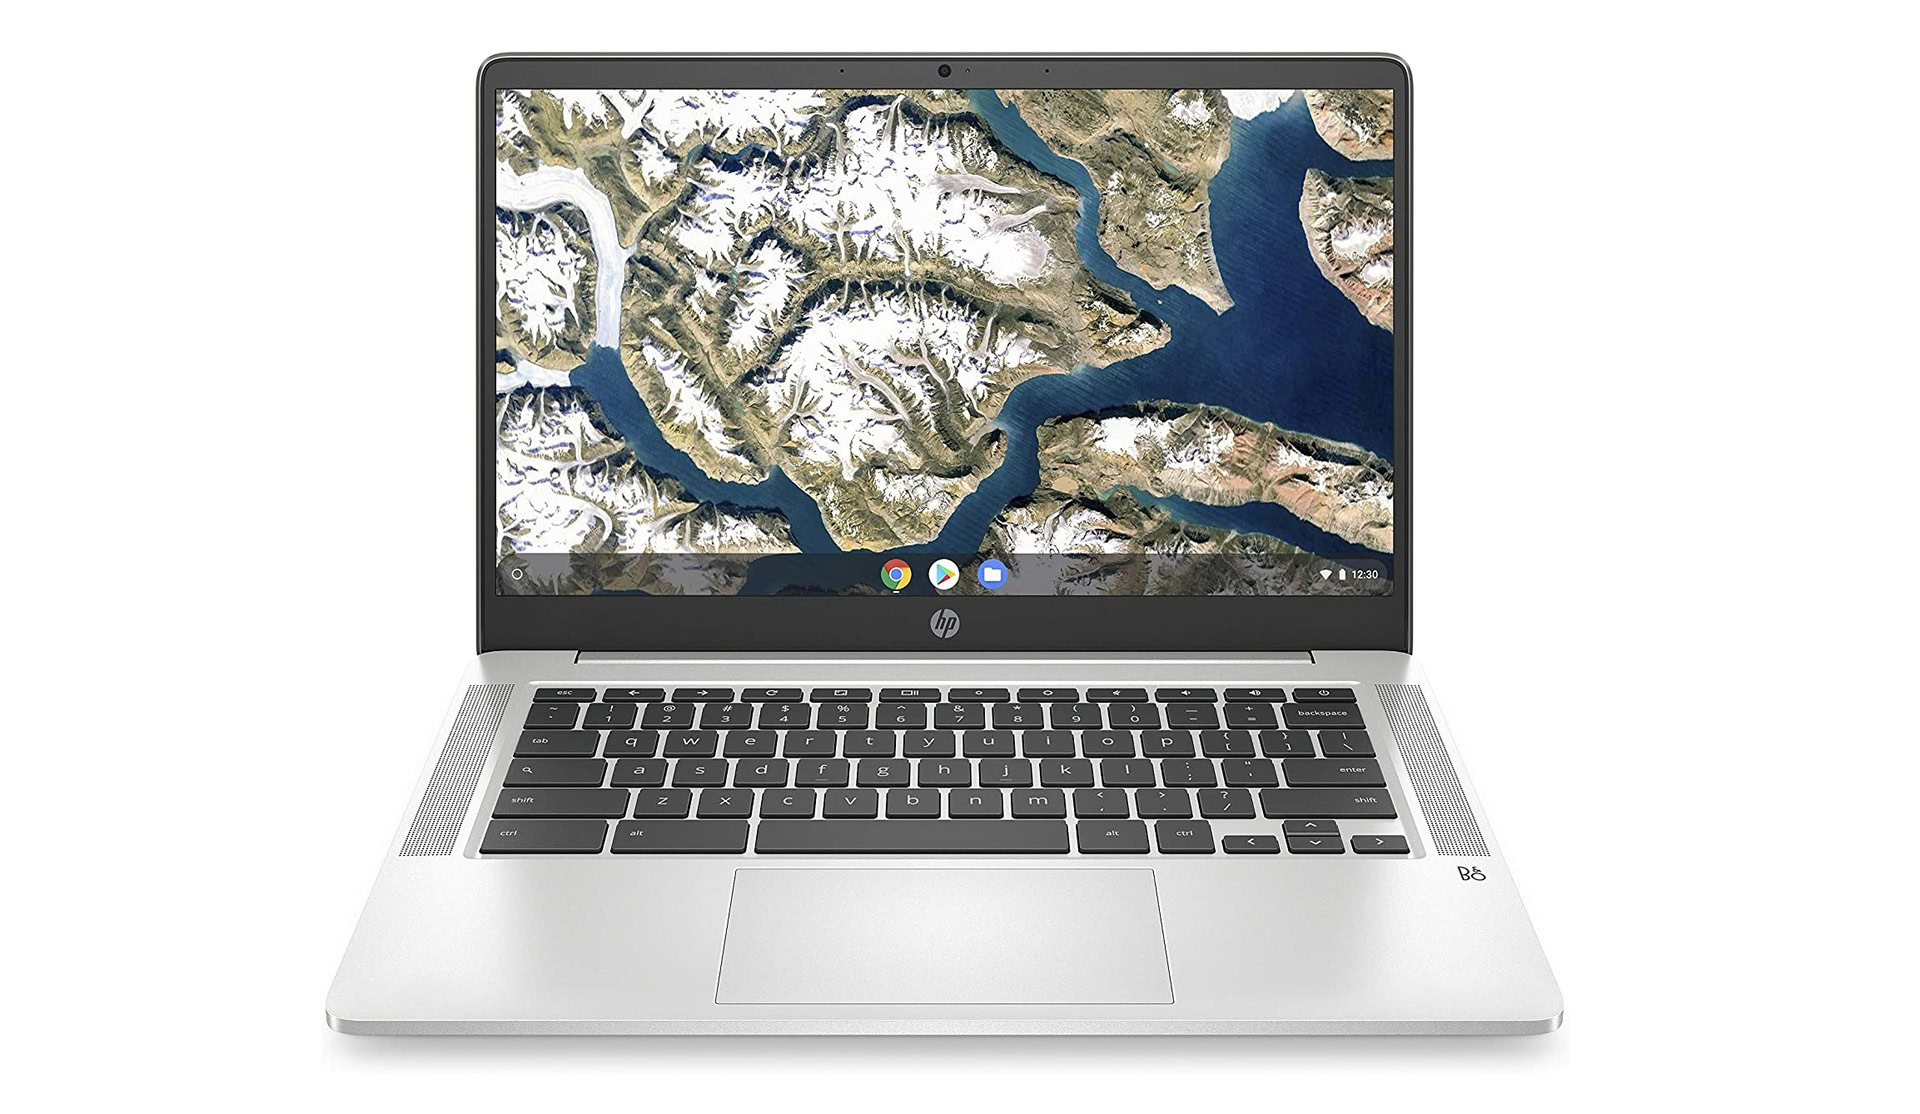 HP Chromebook 14 inch on a white background